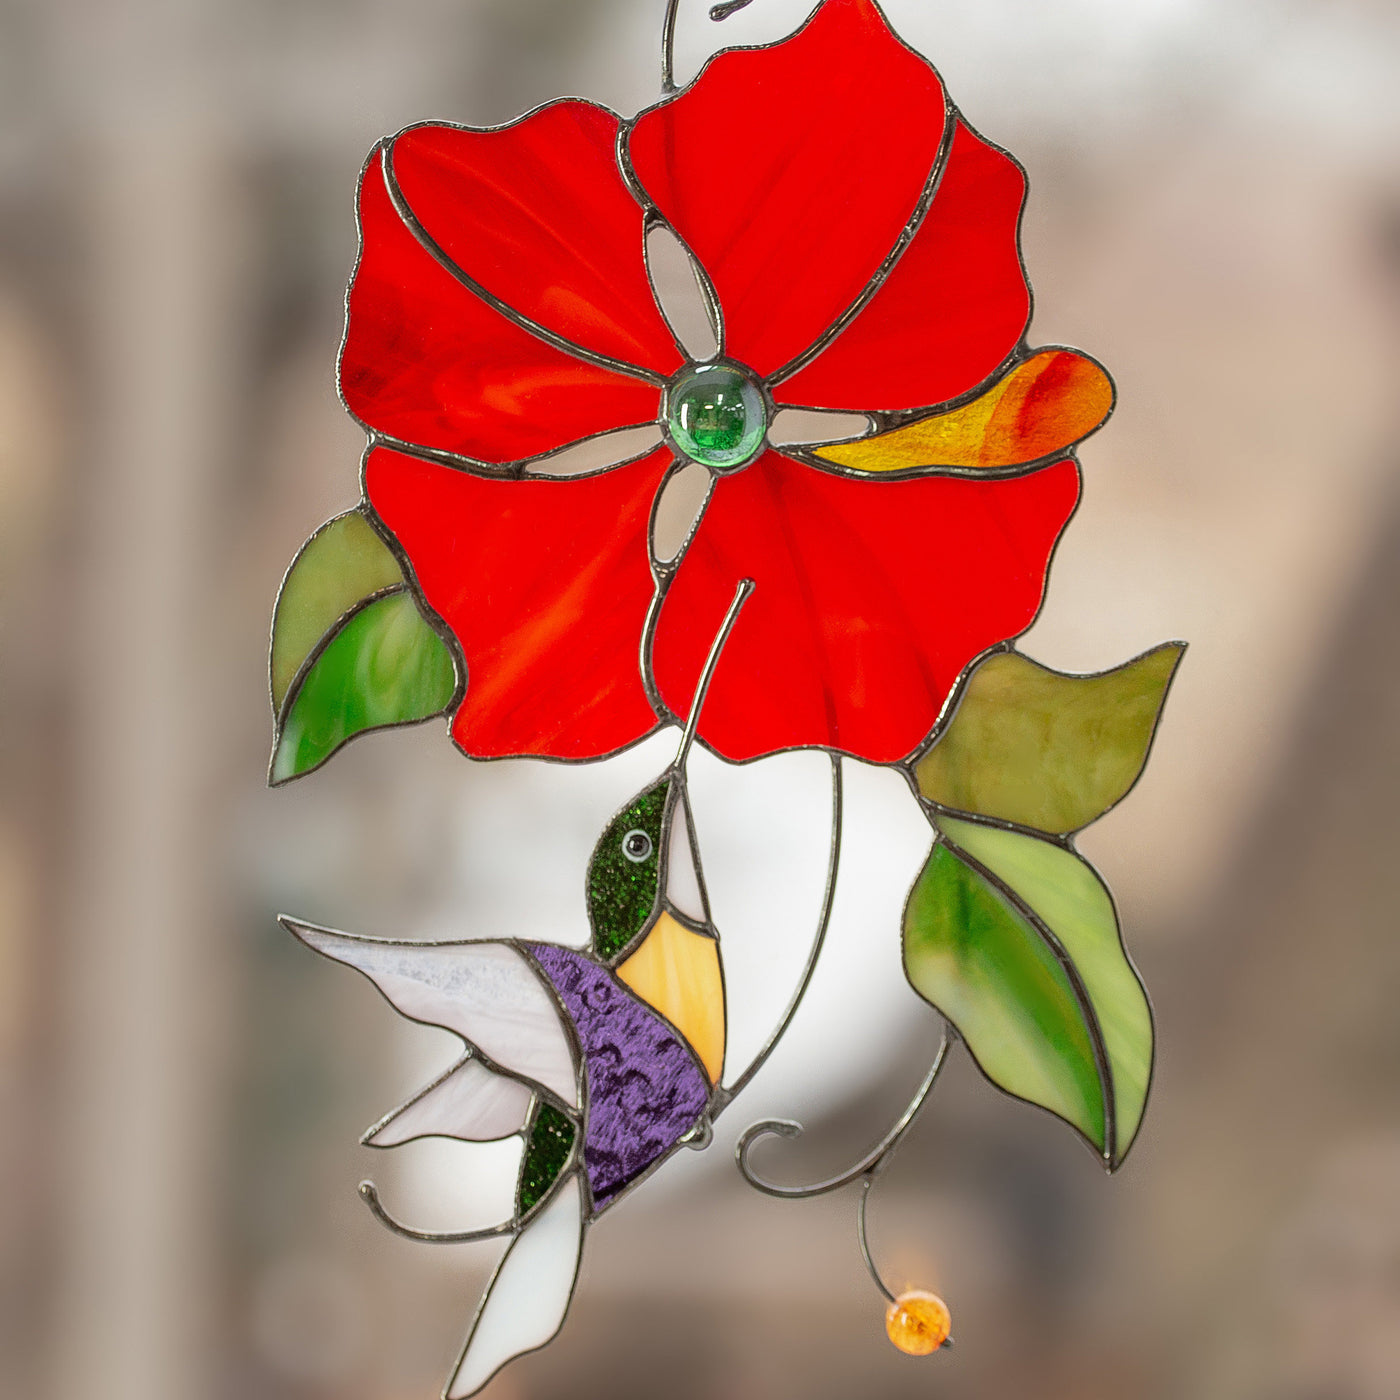 Flying towards the red flower stained glass hummingbird window hanging